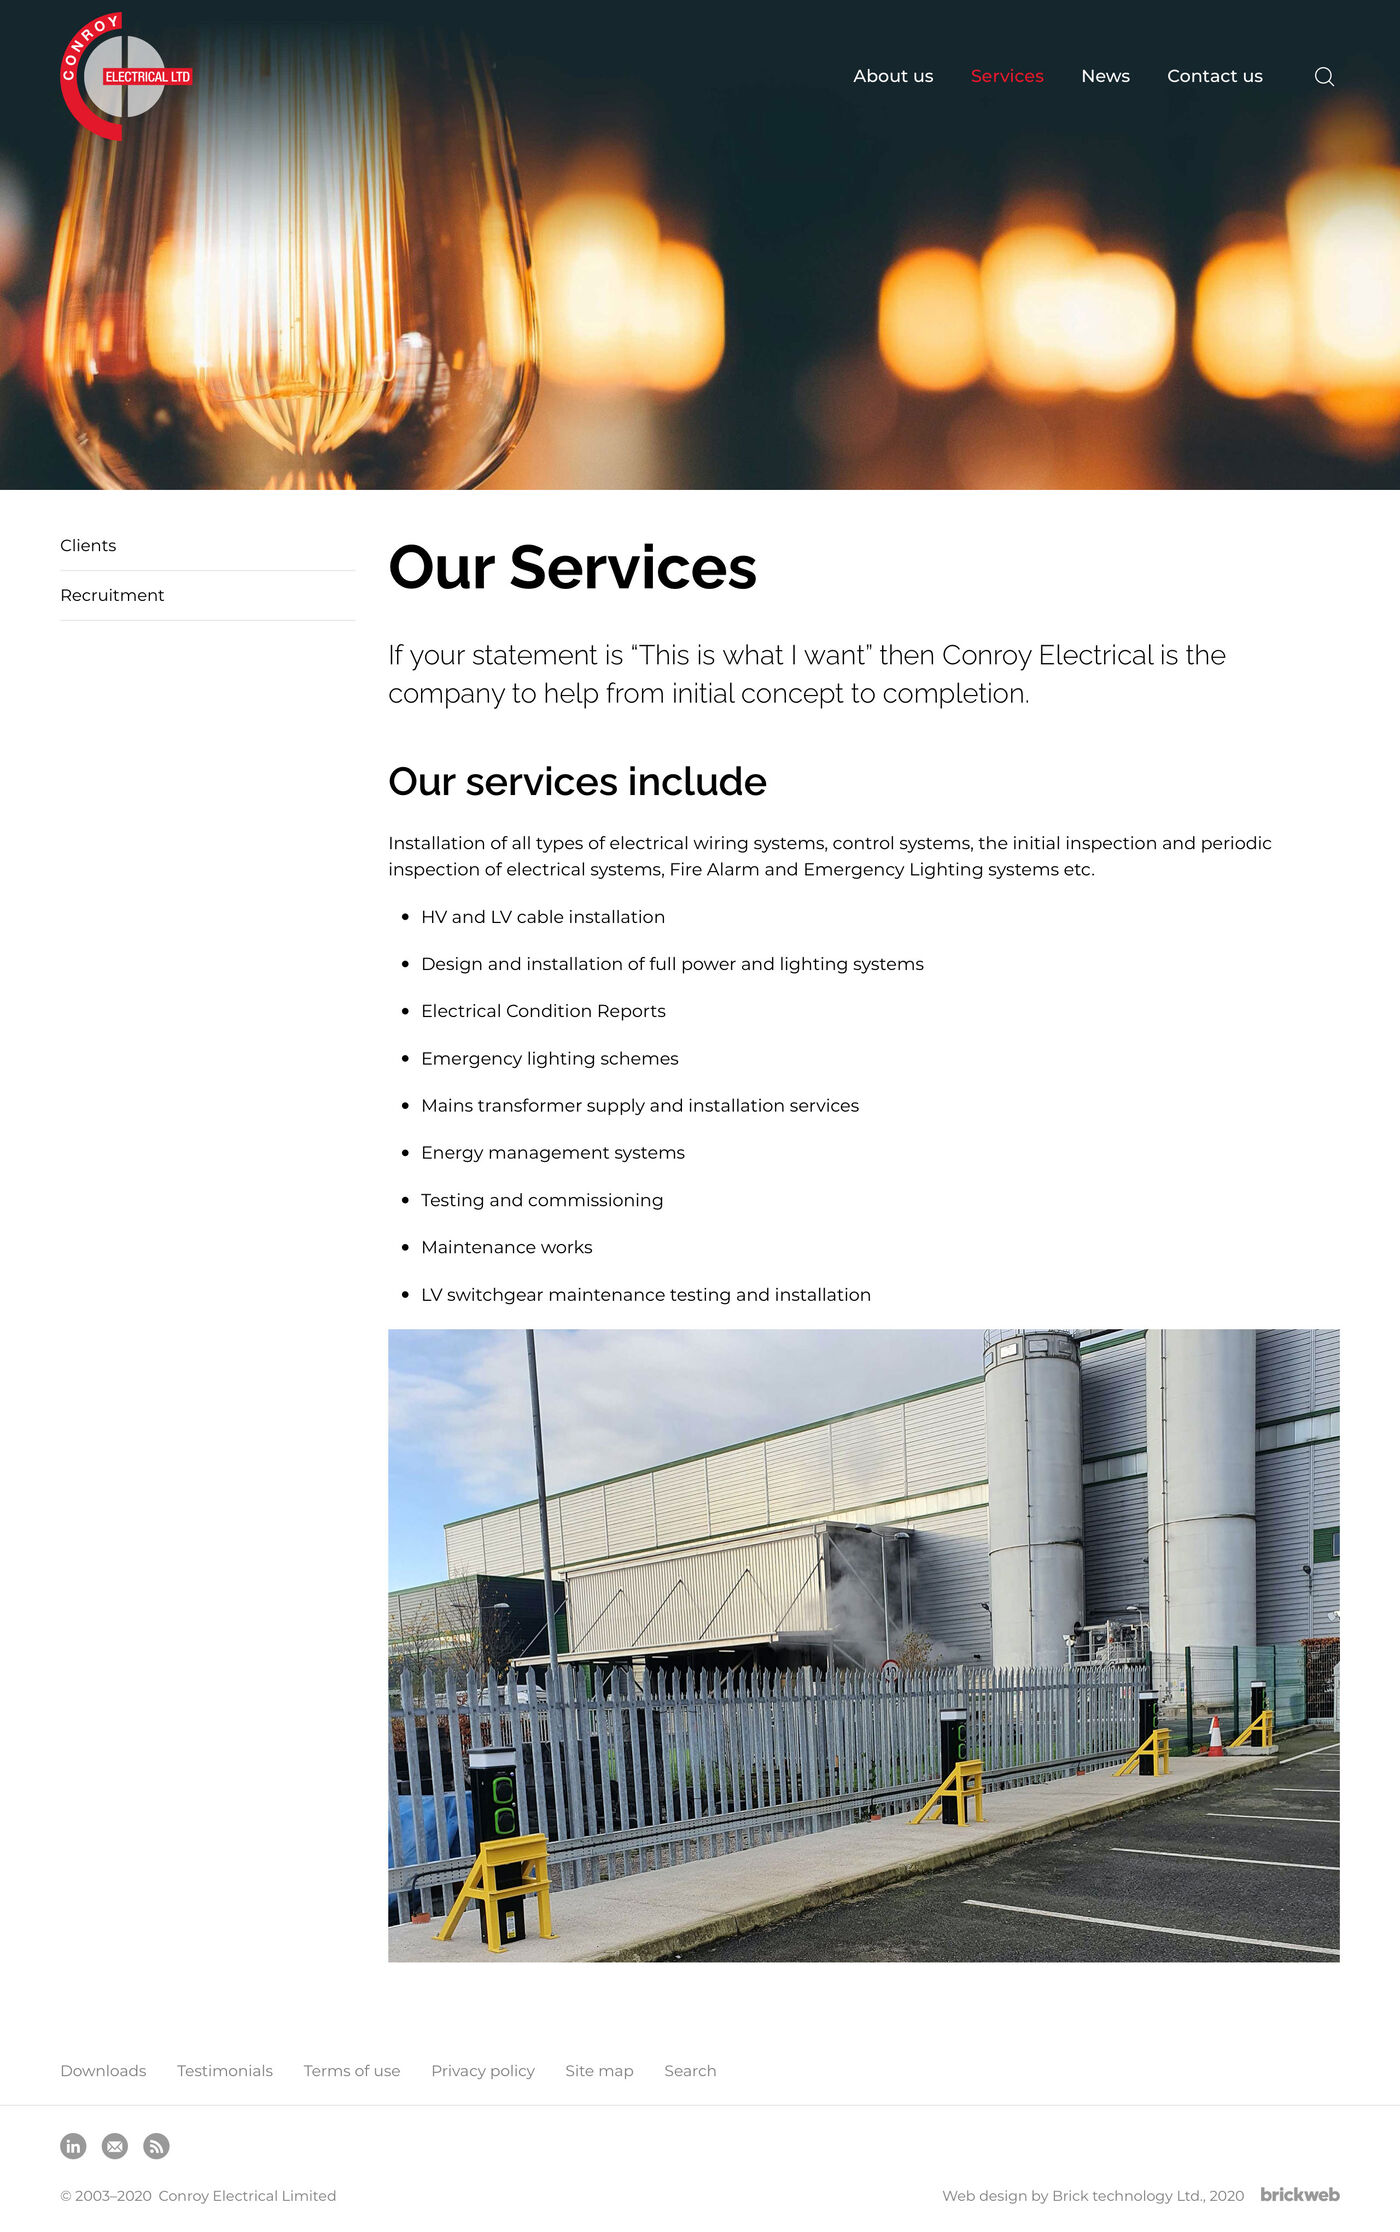 Conroy Electrical Limited Services